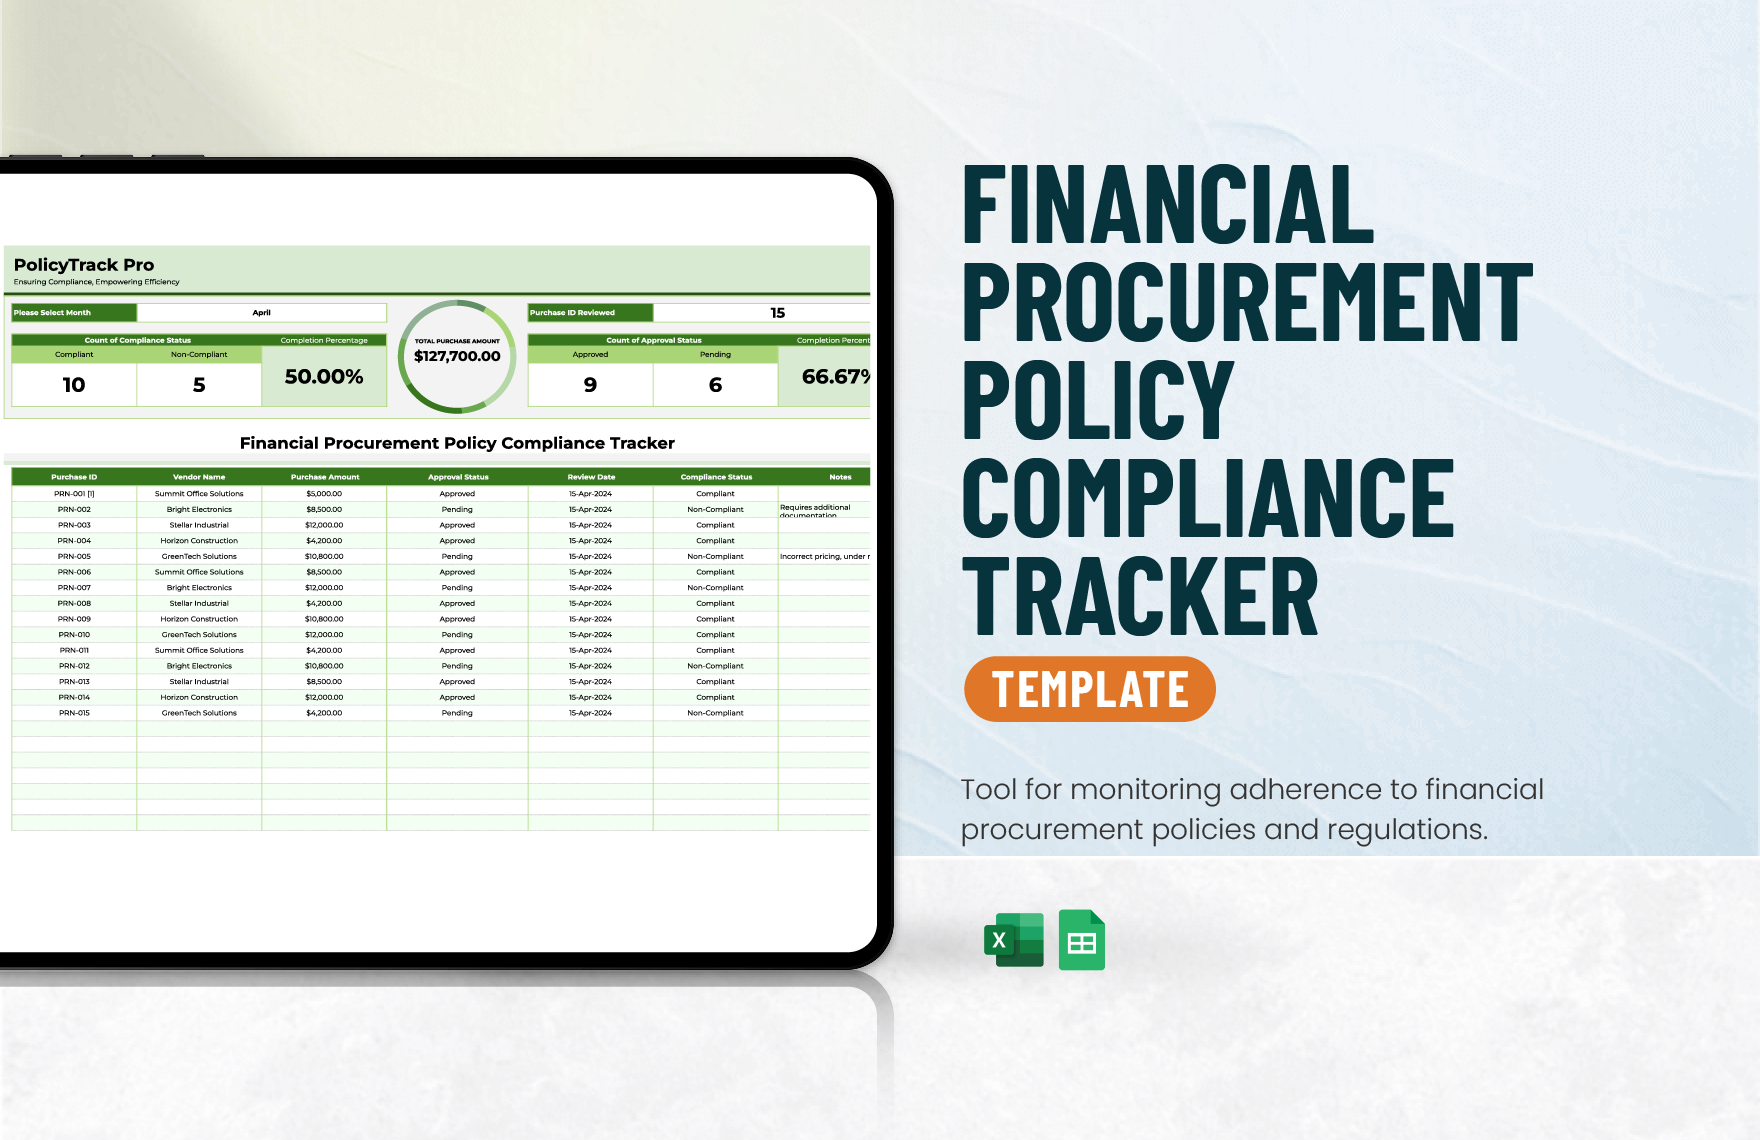 Financial Procurement Policy Compliance Tracker Template